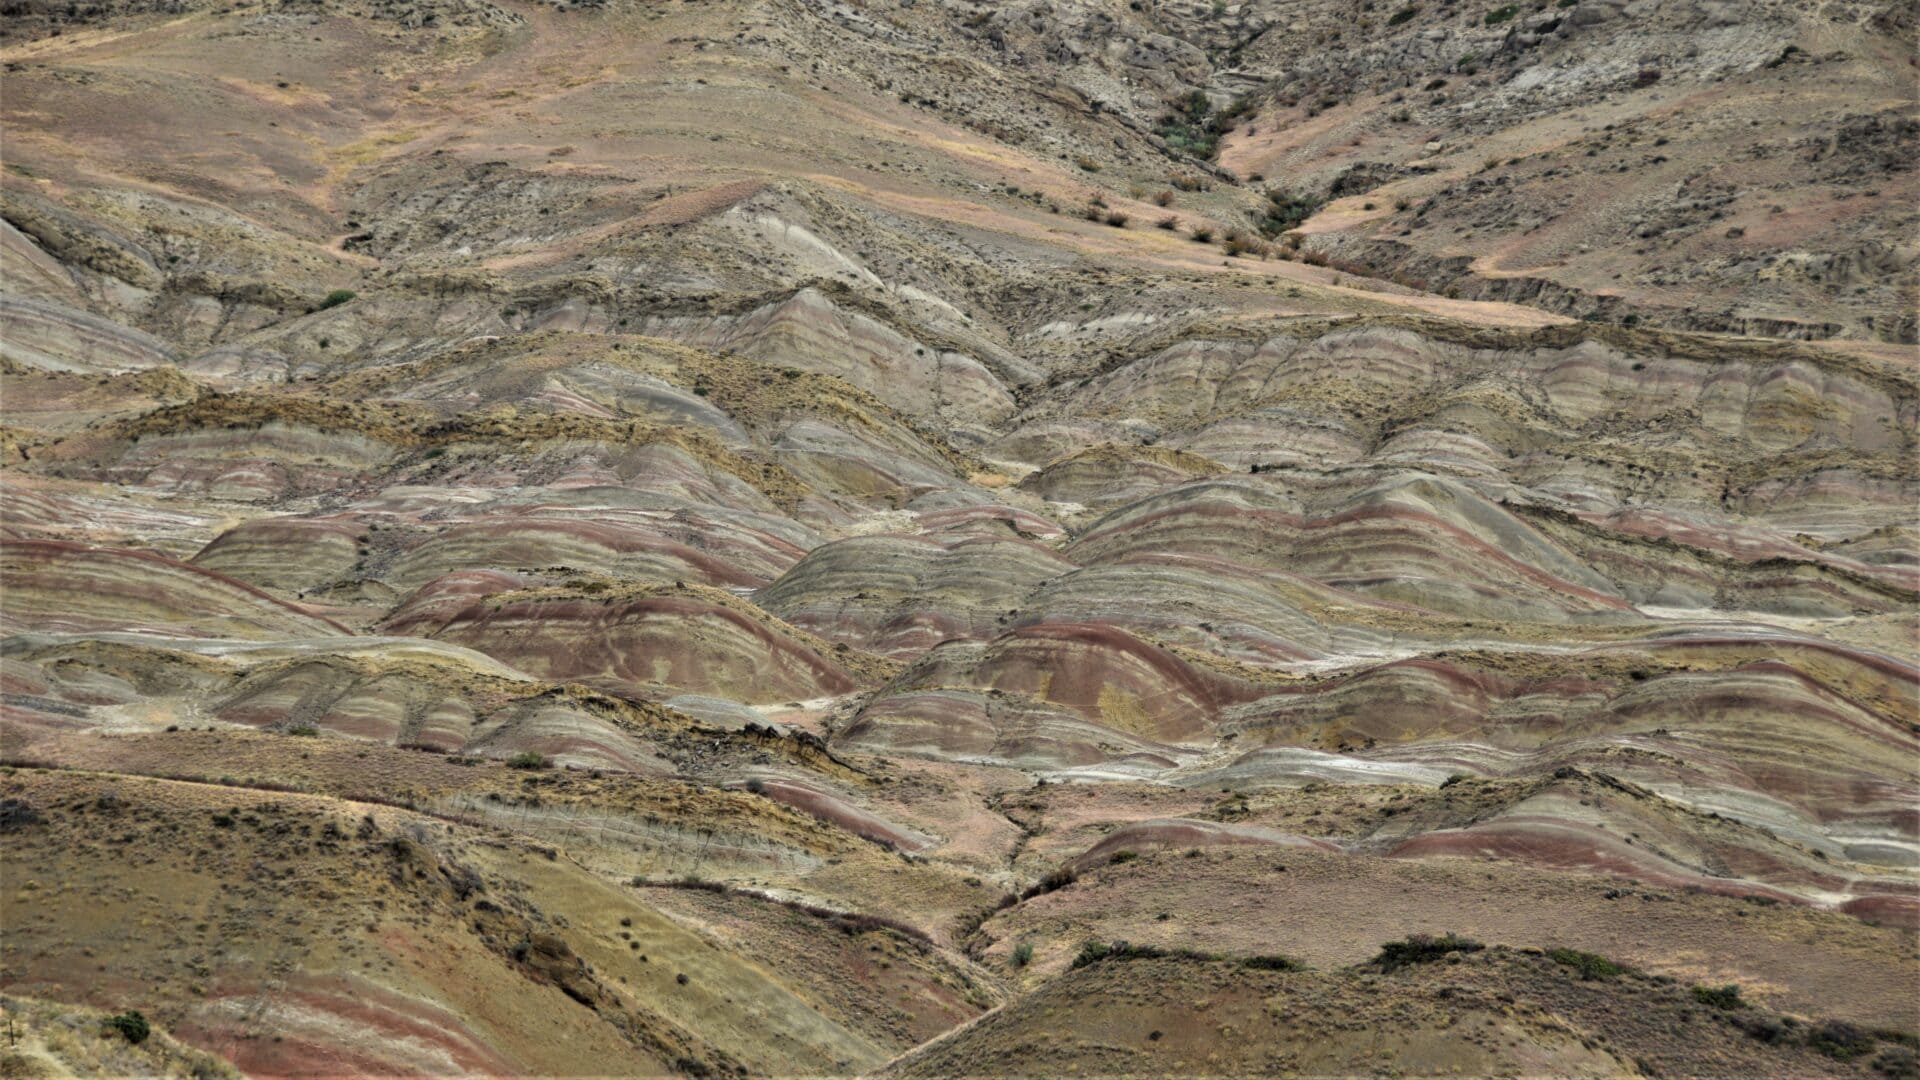 rainbow coloured hills in the southern steppes of Georgia